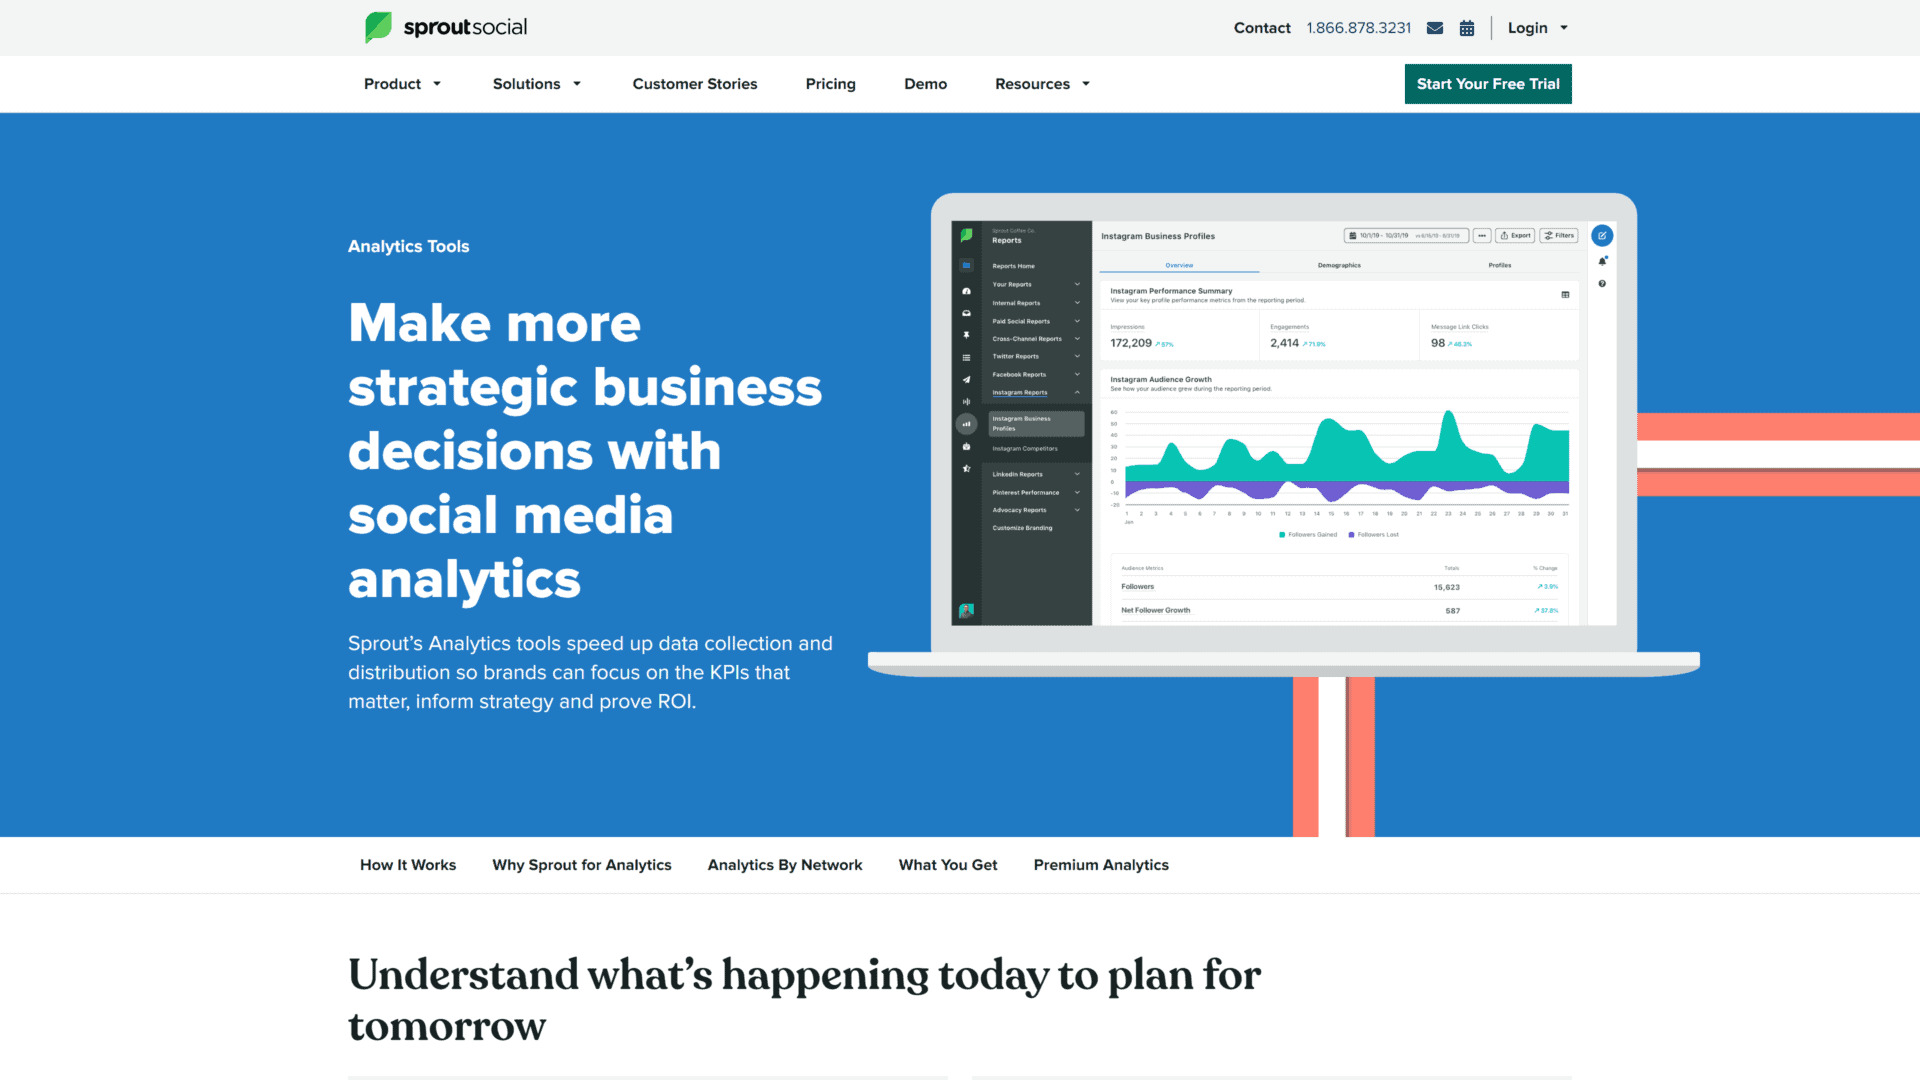 screenshot of the sprout social homepage